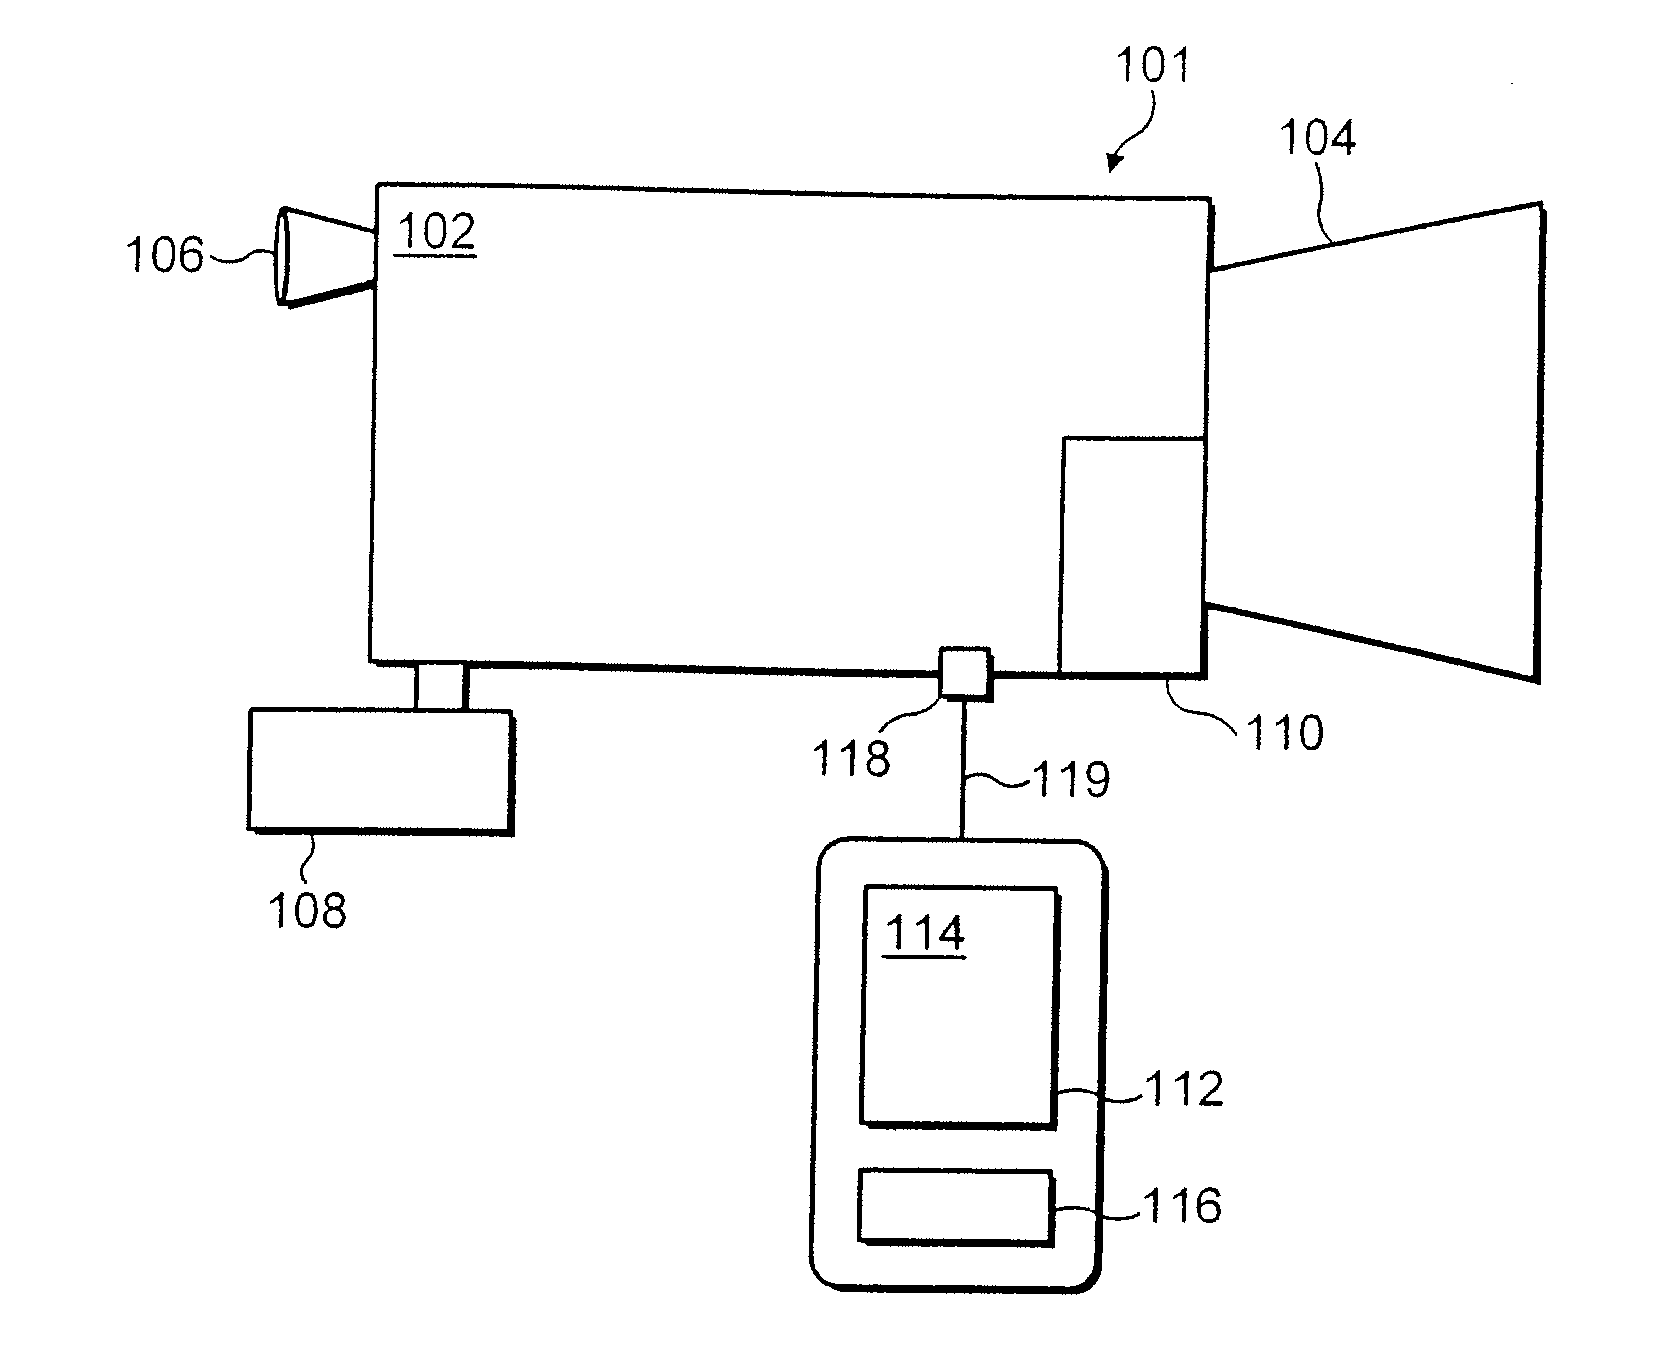 Audio and/or video generation apparatus and method of generating audio and/or video signals